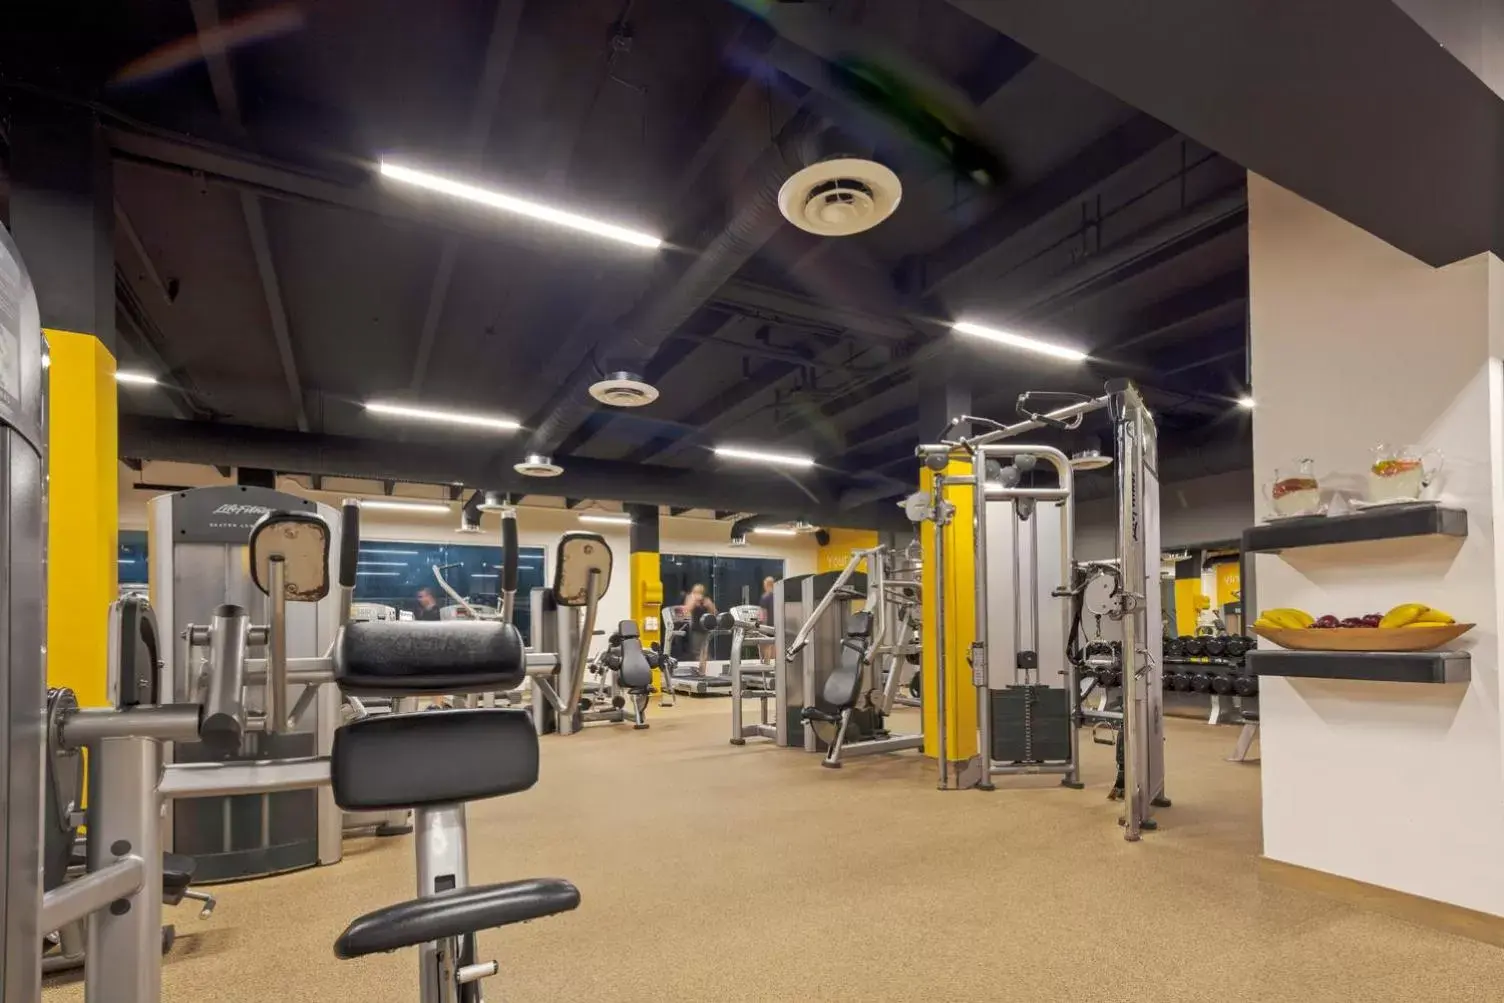 Fitness centre/facilities, Fitness Center/Facilities in Hilton Playa del Carmen, an All-Inclusive Adult Only Resort